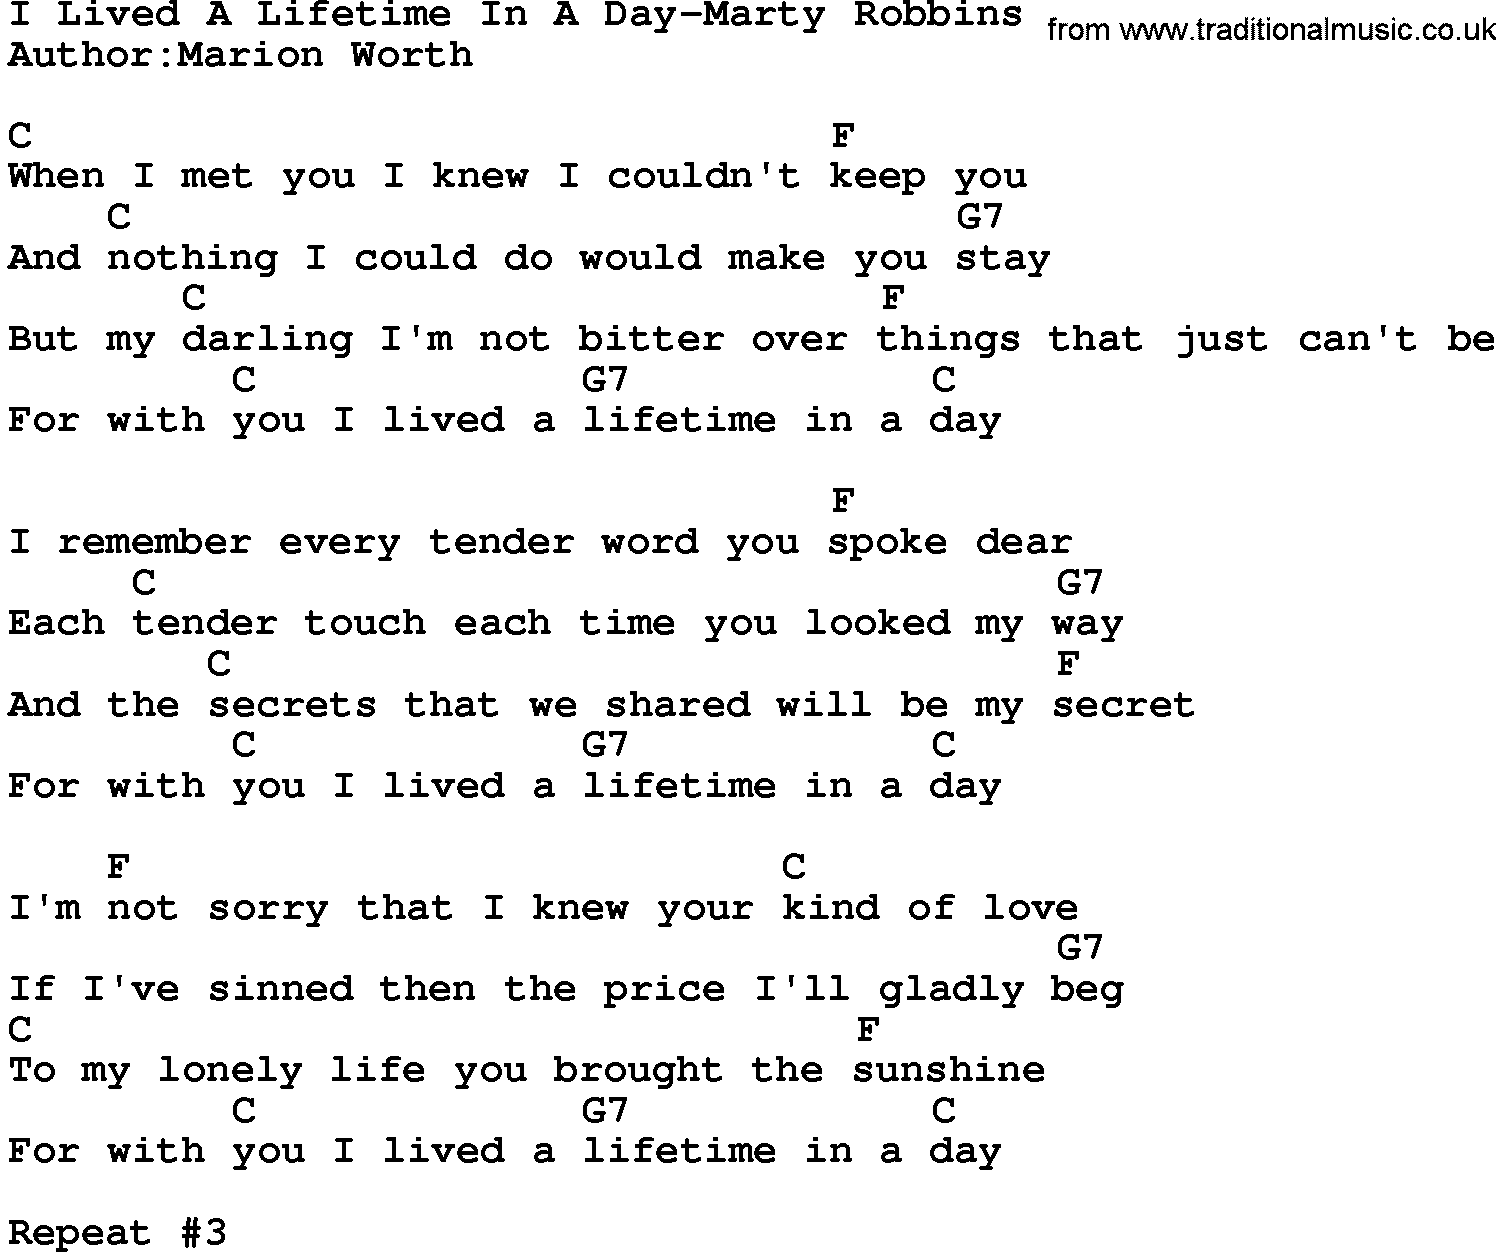 Country music song: I Lived A Lifetime In A Day-Marty Robbins lyrics and chords